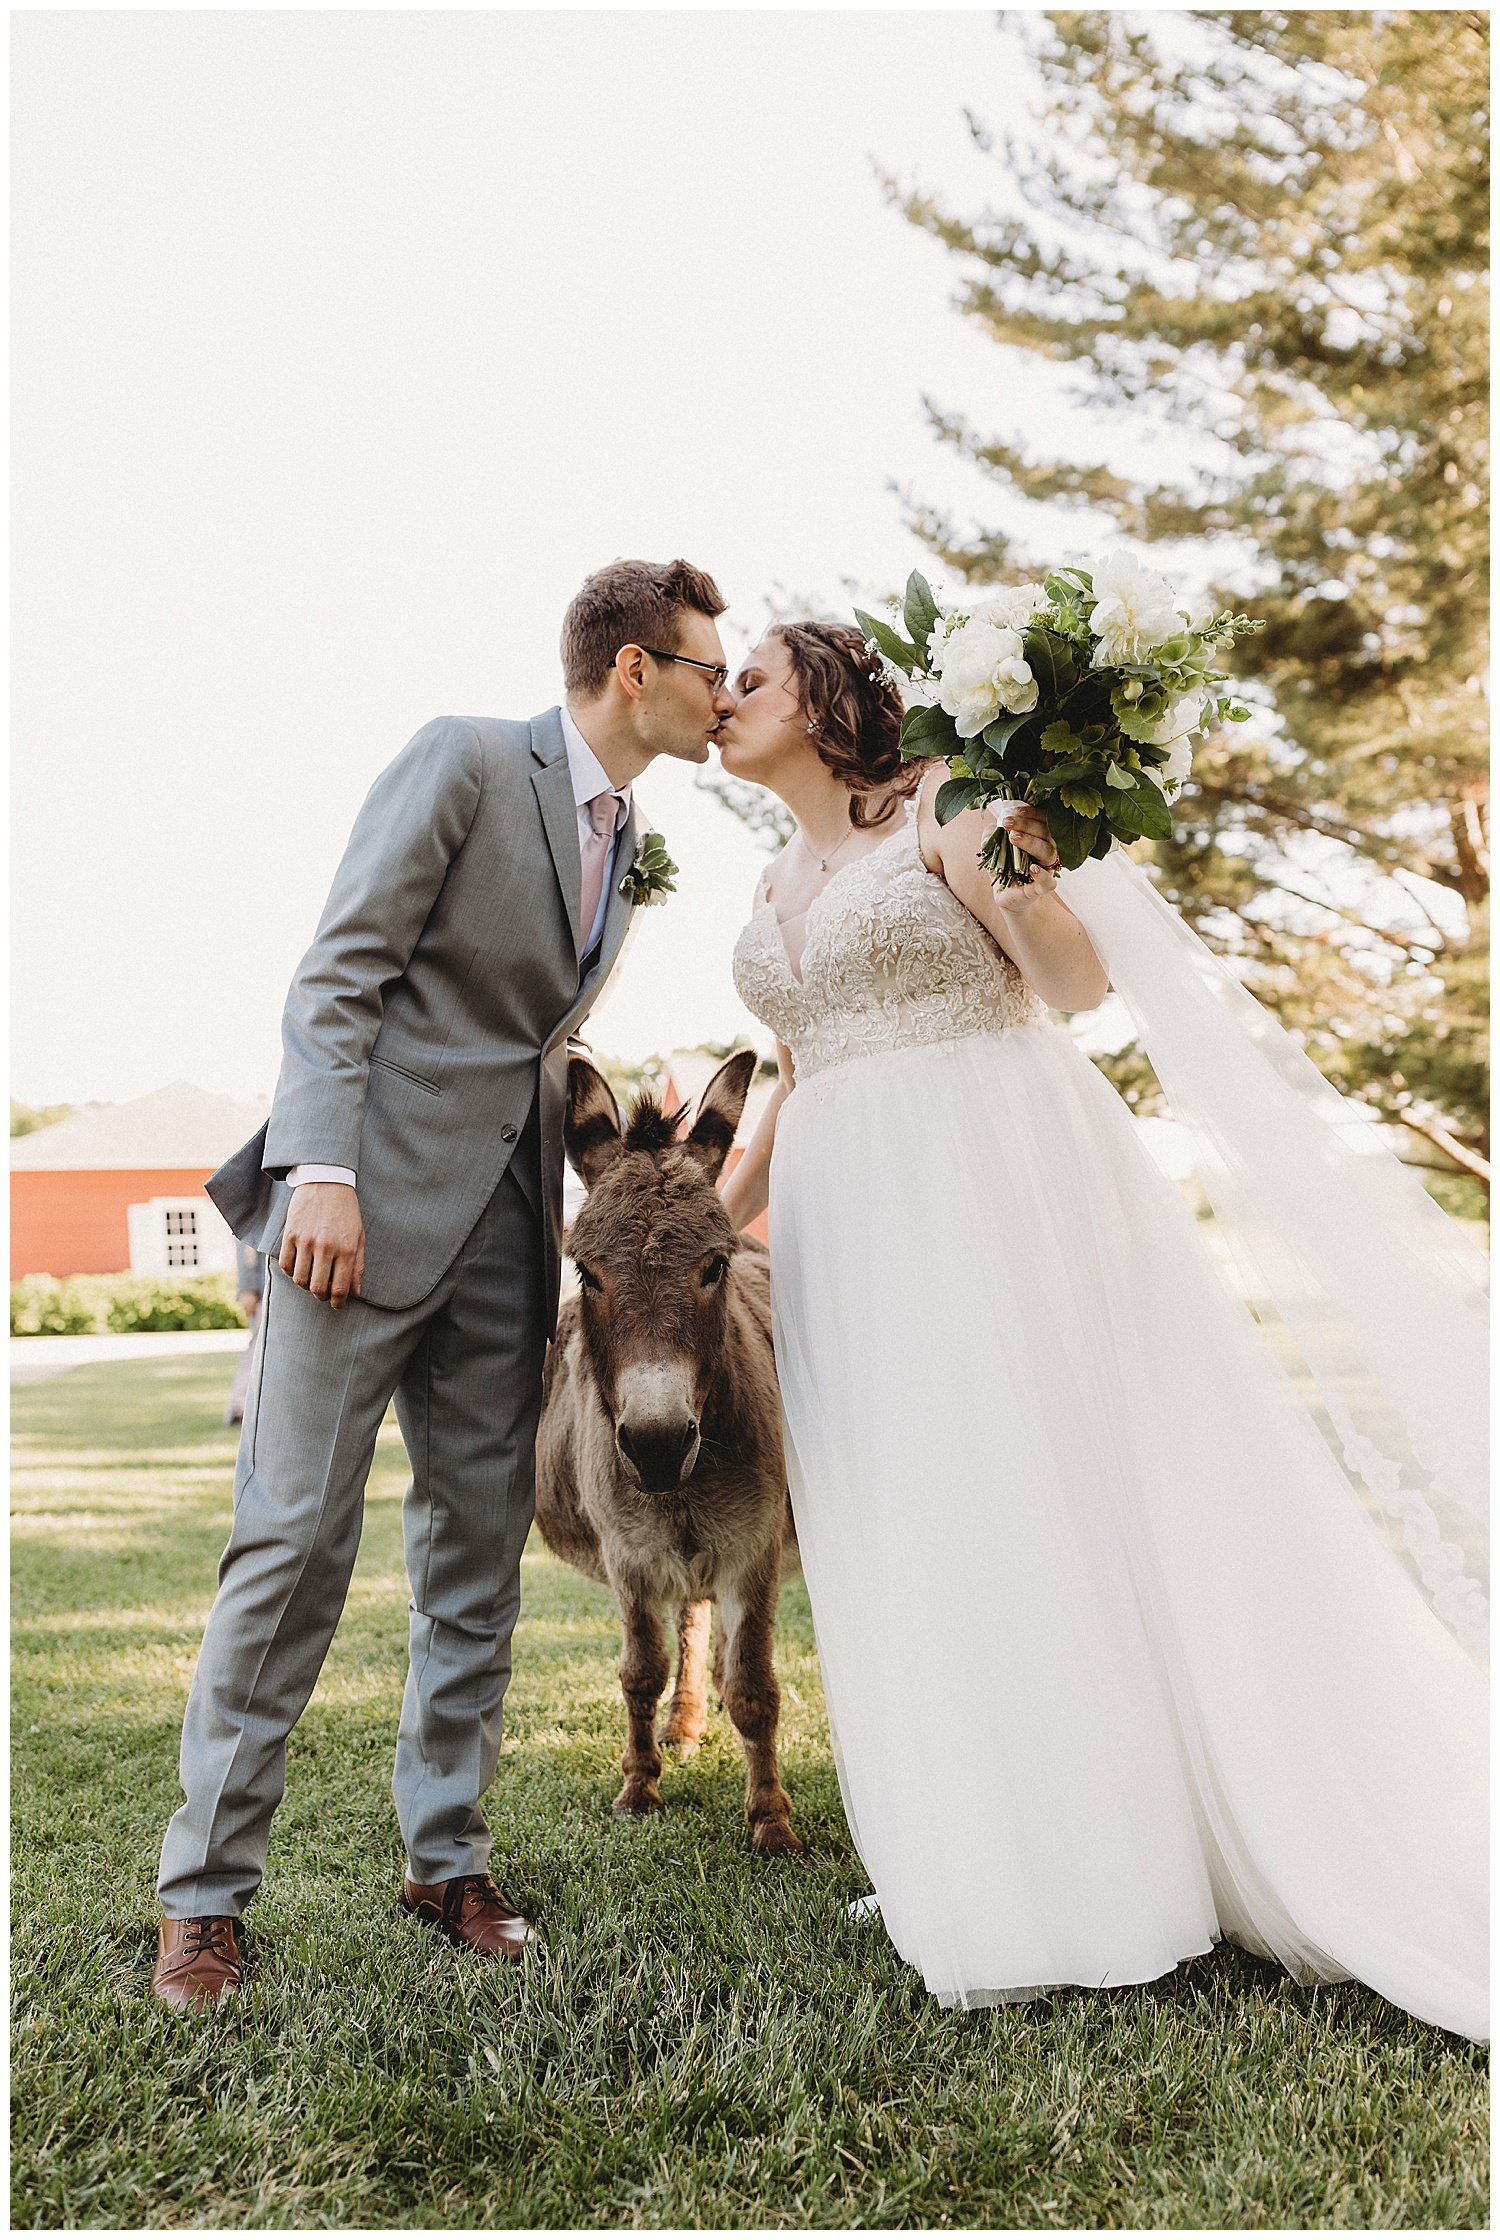  We got engagement pictures with the donkeys so I’m glad we could come full circle and capture their cuteness on the wedding day too! Thanks for the photo-op Earl! (I think that’s his name…) 